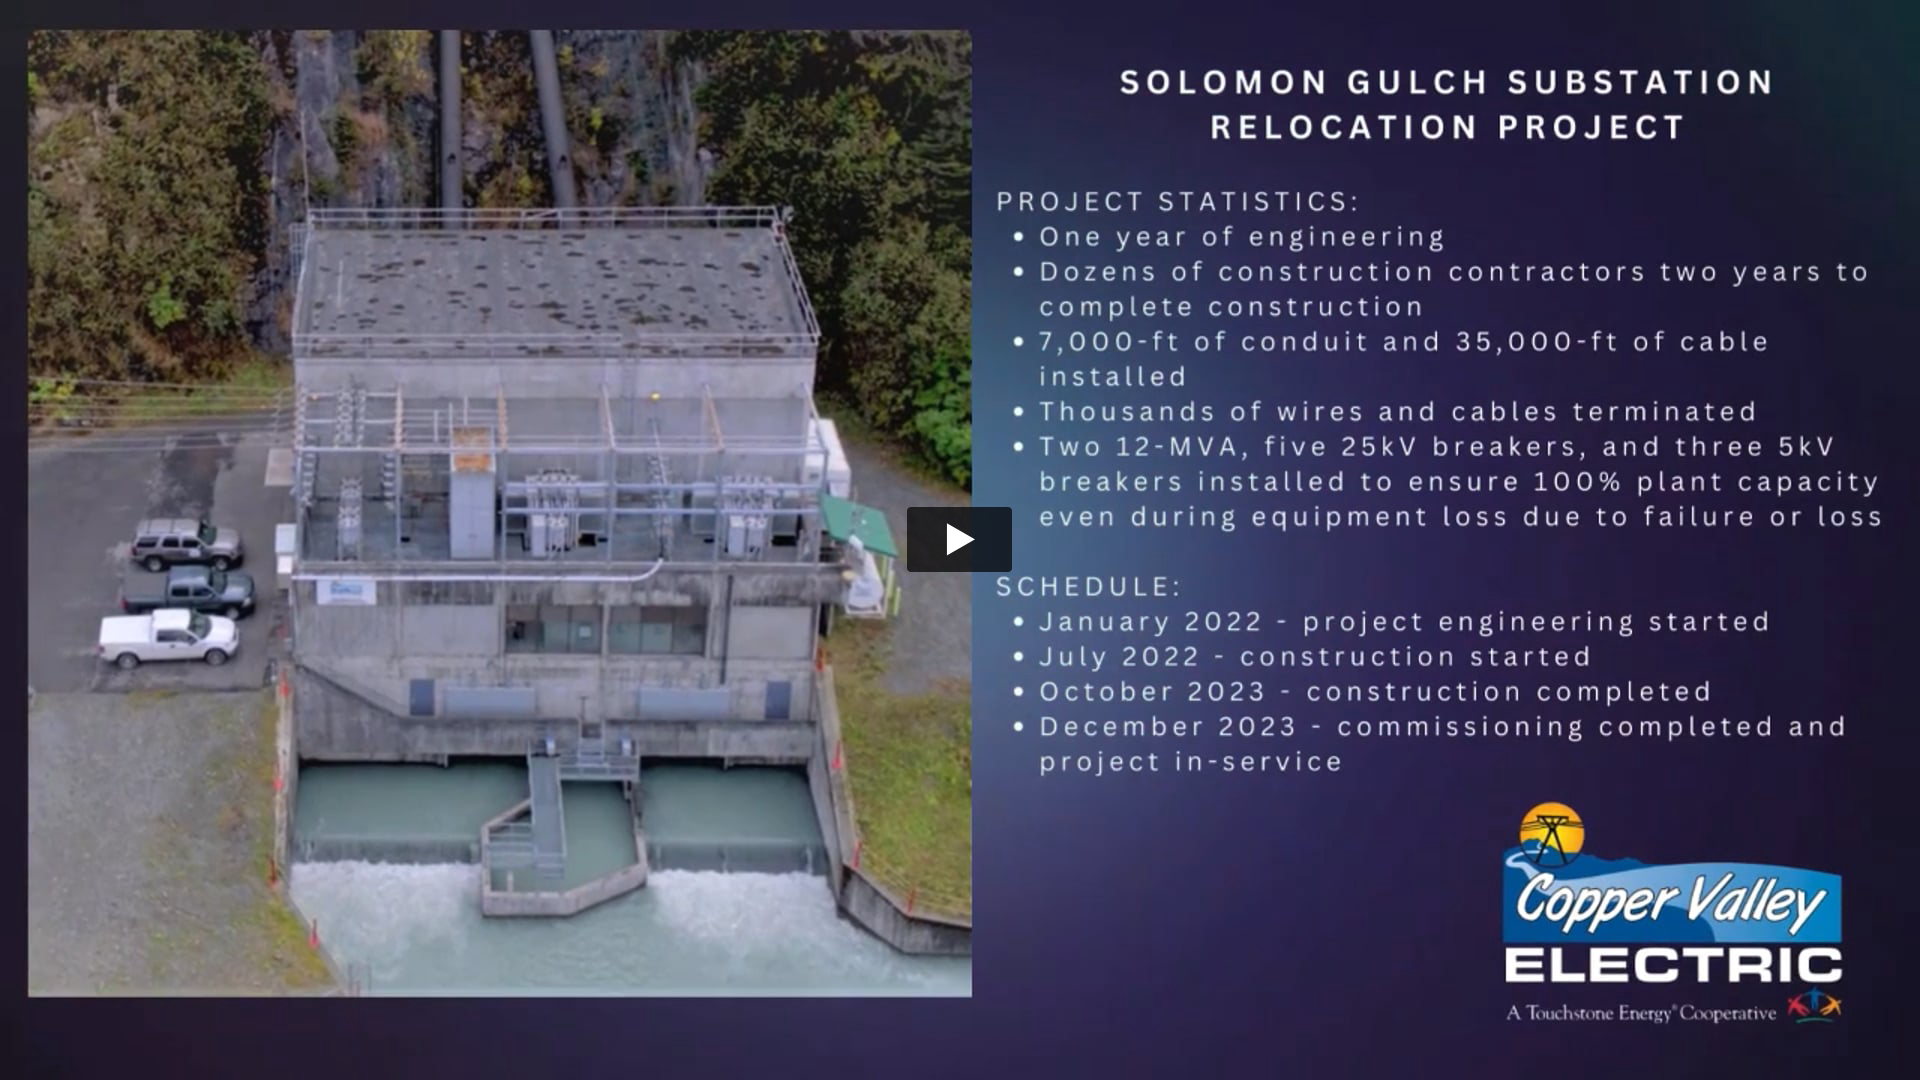 Click to view a video summary of the Solomon Gulch Substation Relocation Project